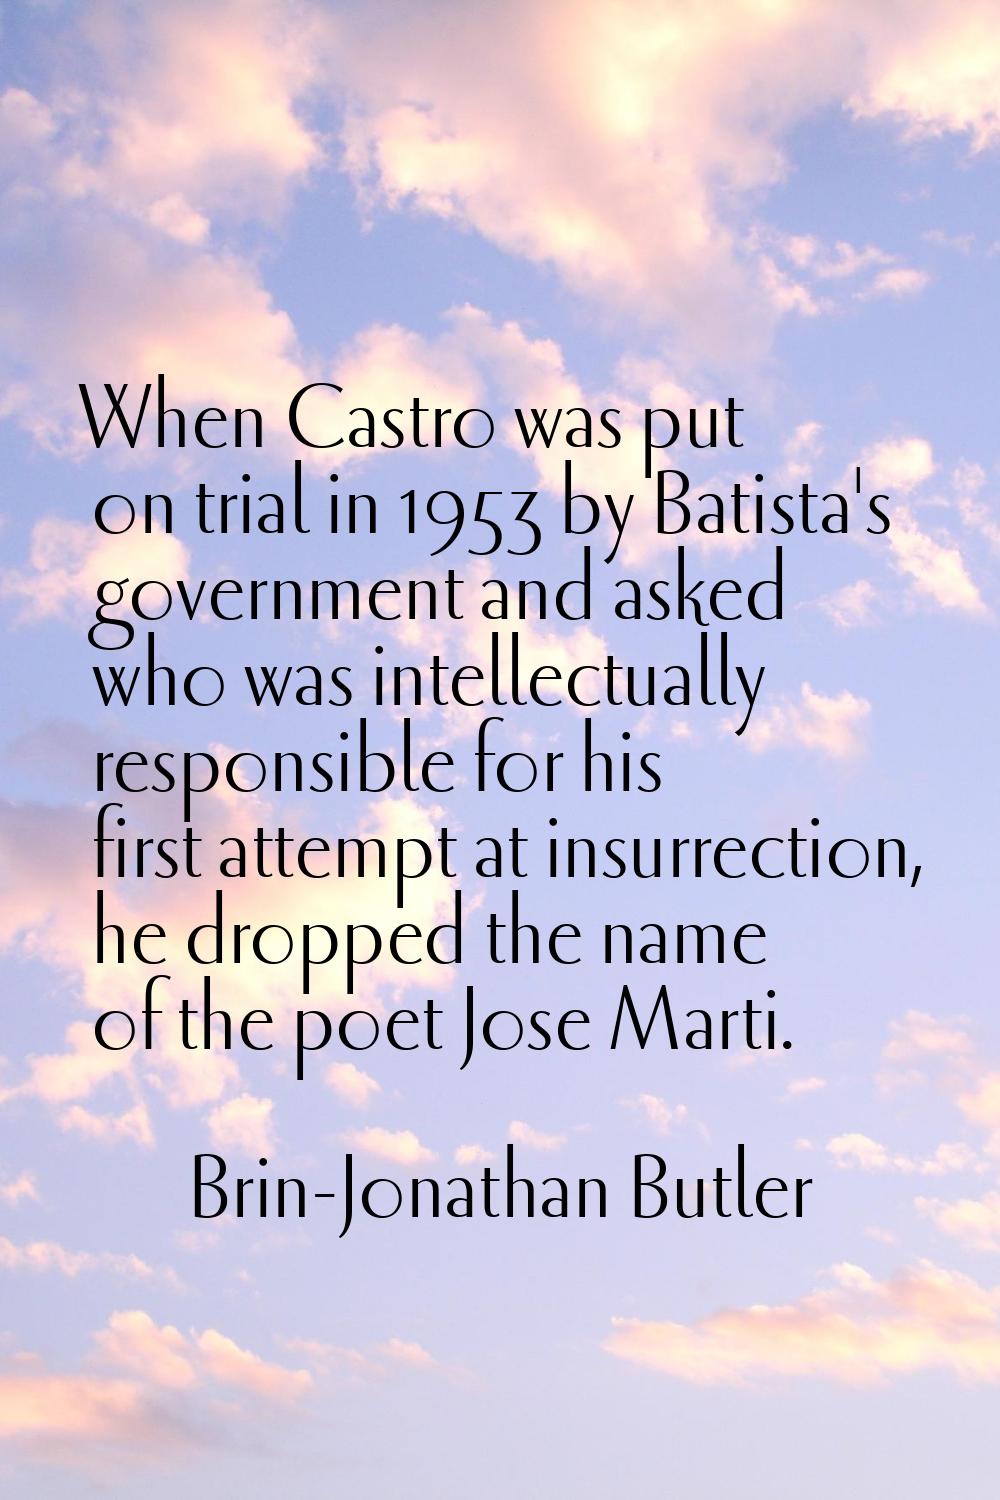 When Castro was put on trial in 1953 by Batista's government and asked who was intellectually respo